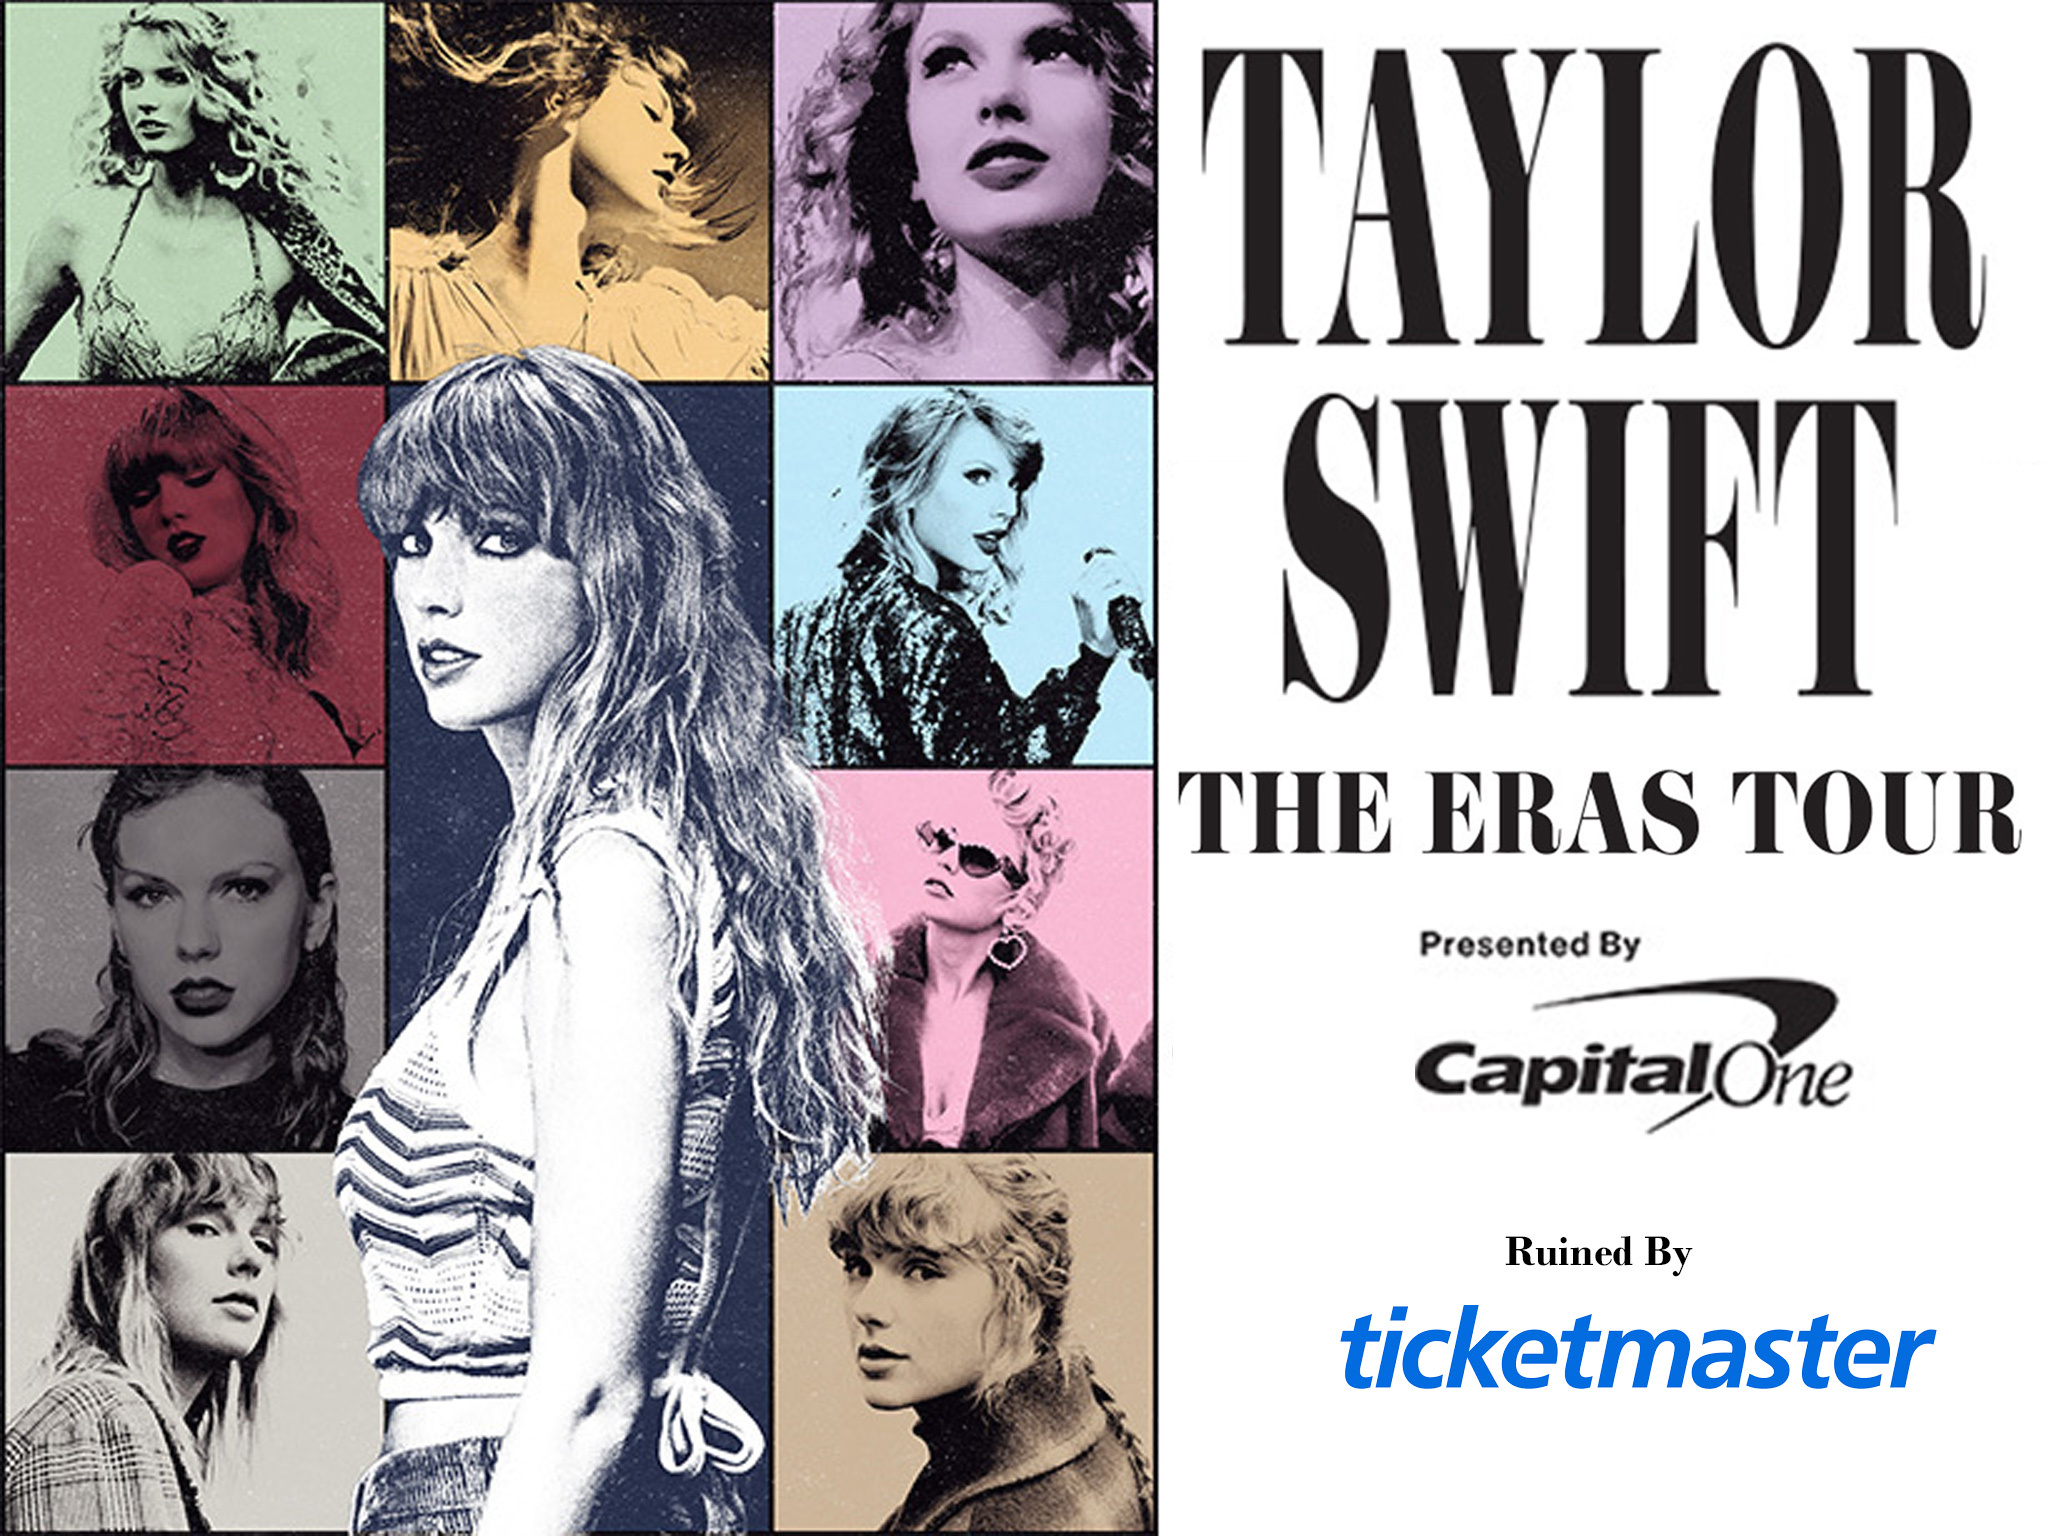 Ticketmaster and Taylor Swift